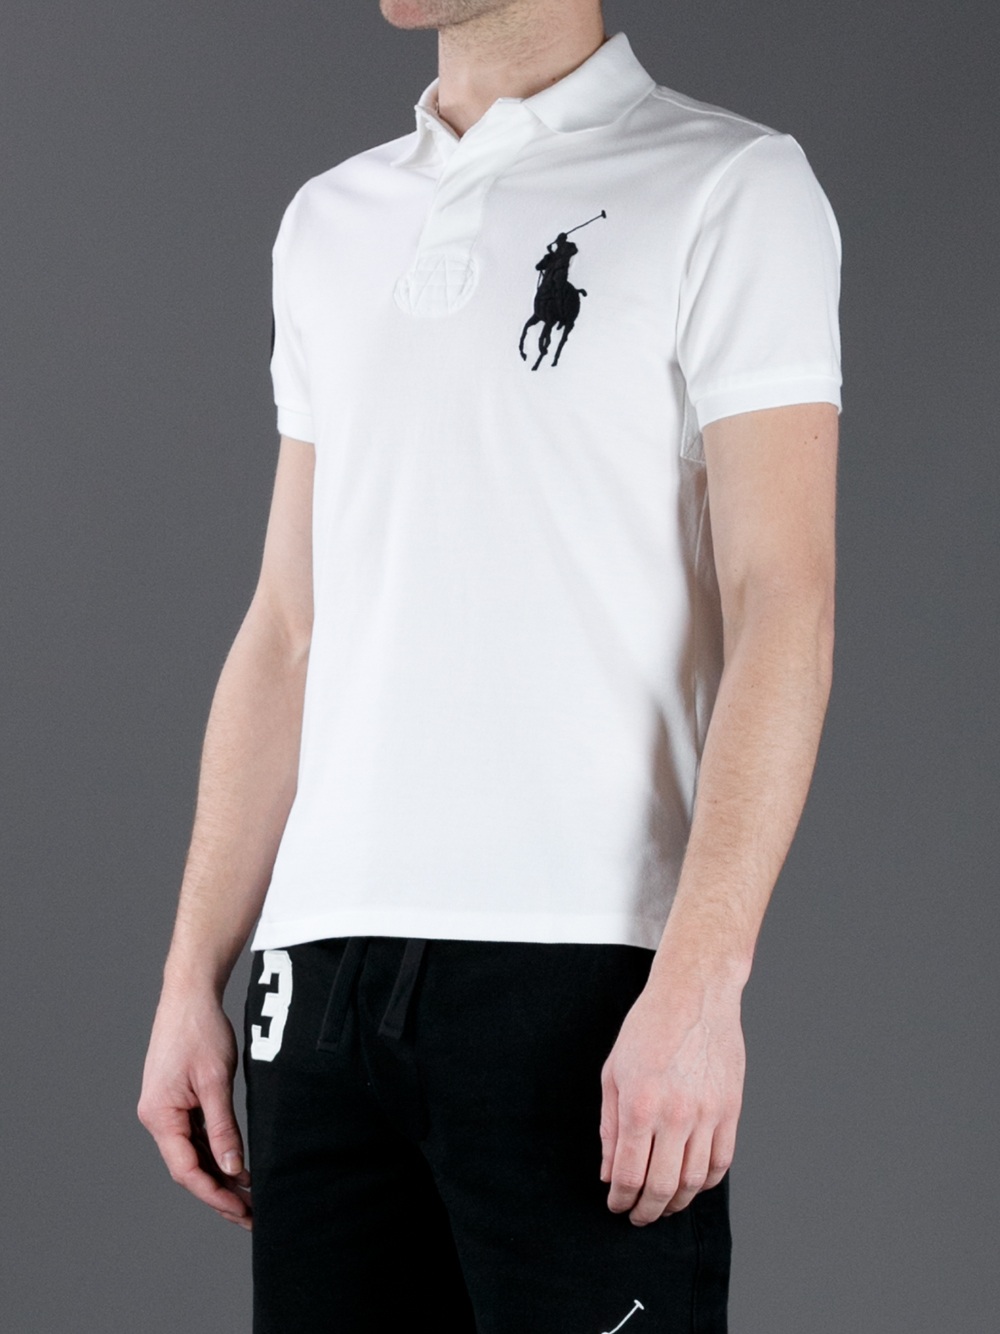 Lyst Polo Ralph Lauren Fitted Logo Polo Shirt in White